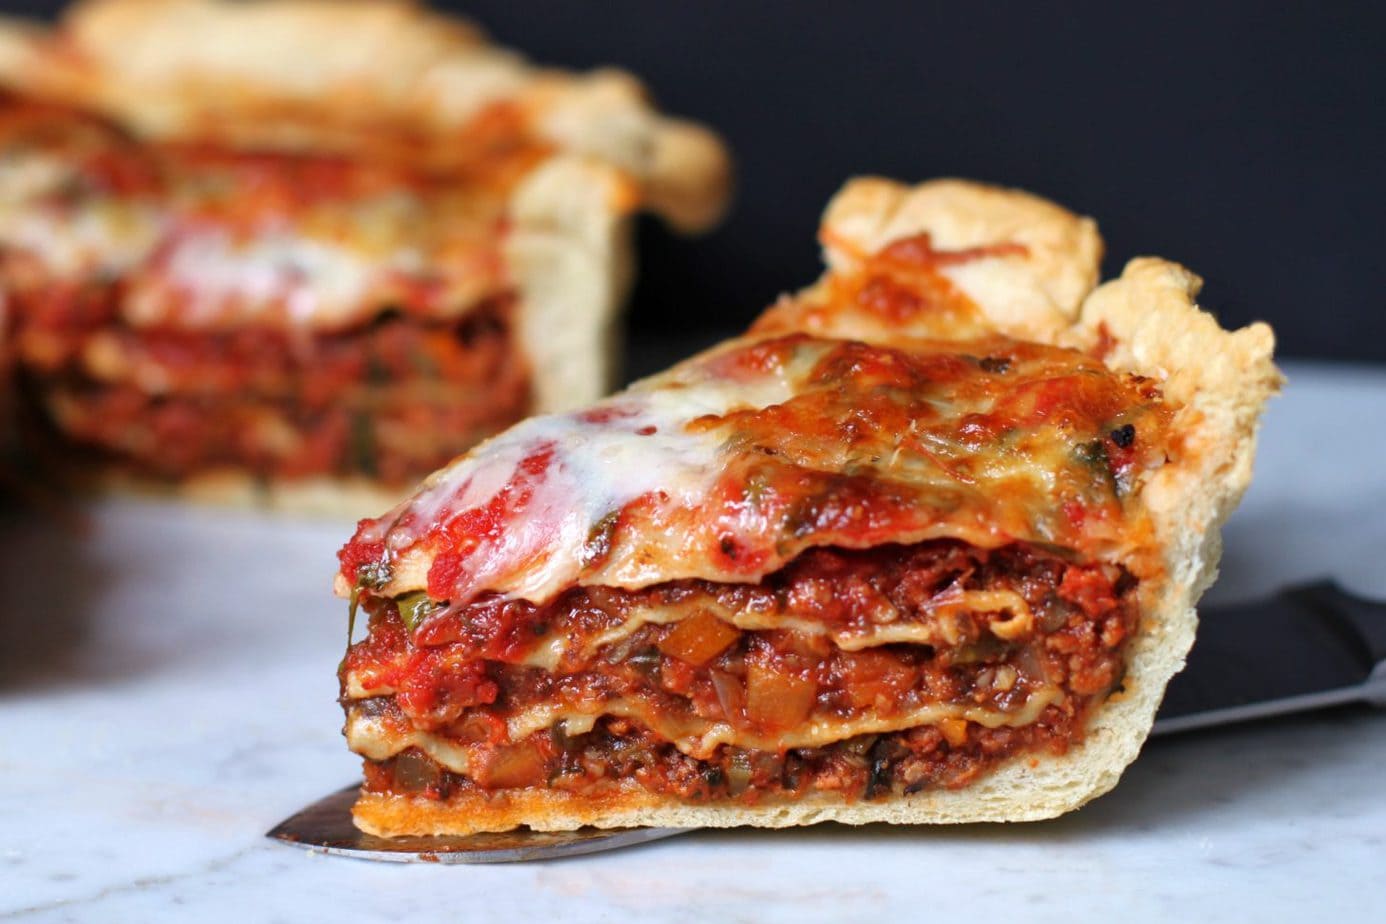 A slice of deep dish pizza with layers of noodles and Bolognese.